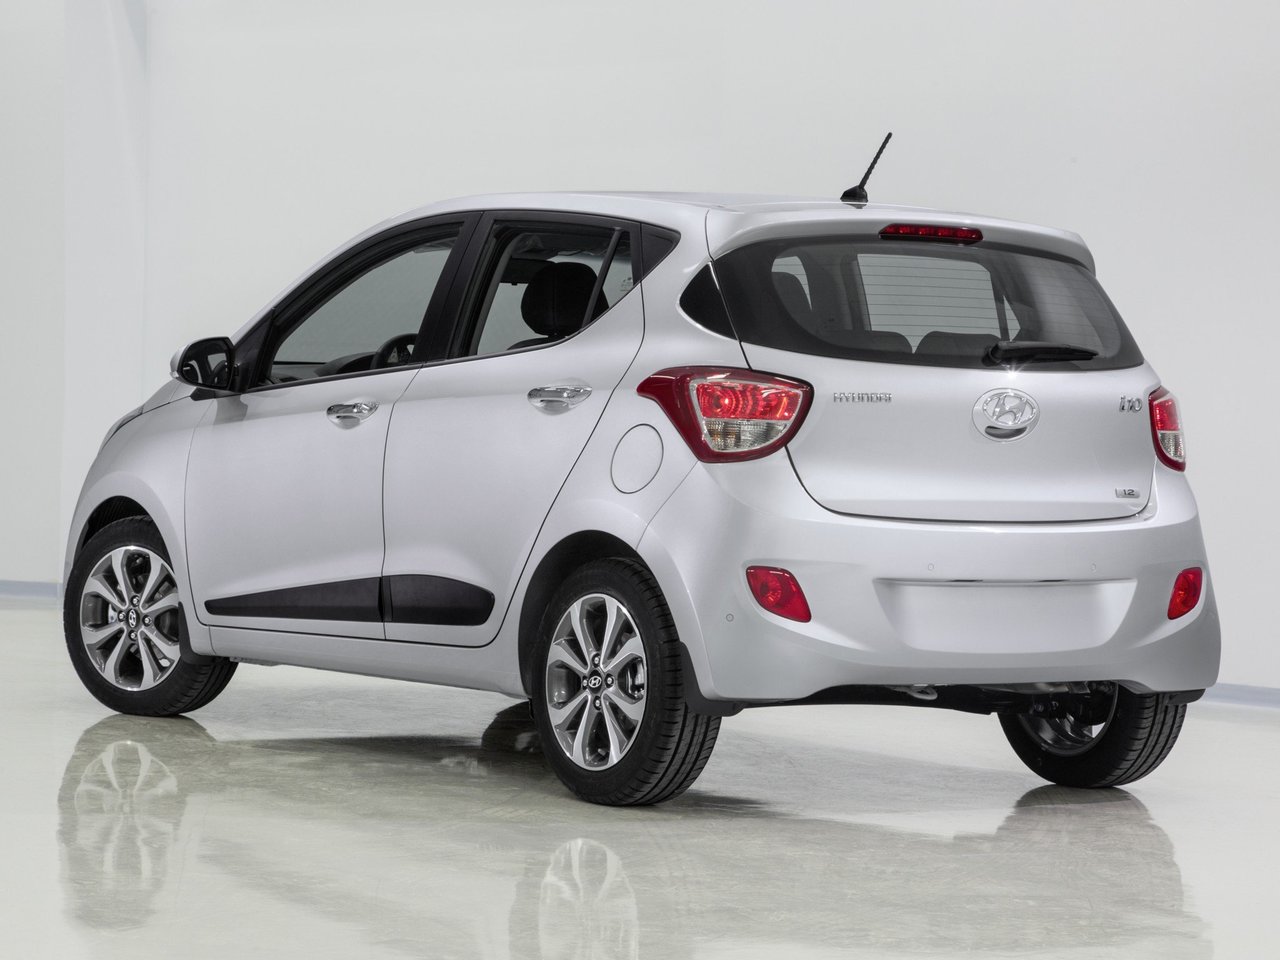 Hyundai i10 technical specifications and fuel economy